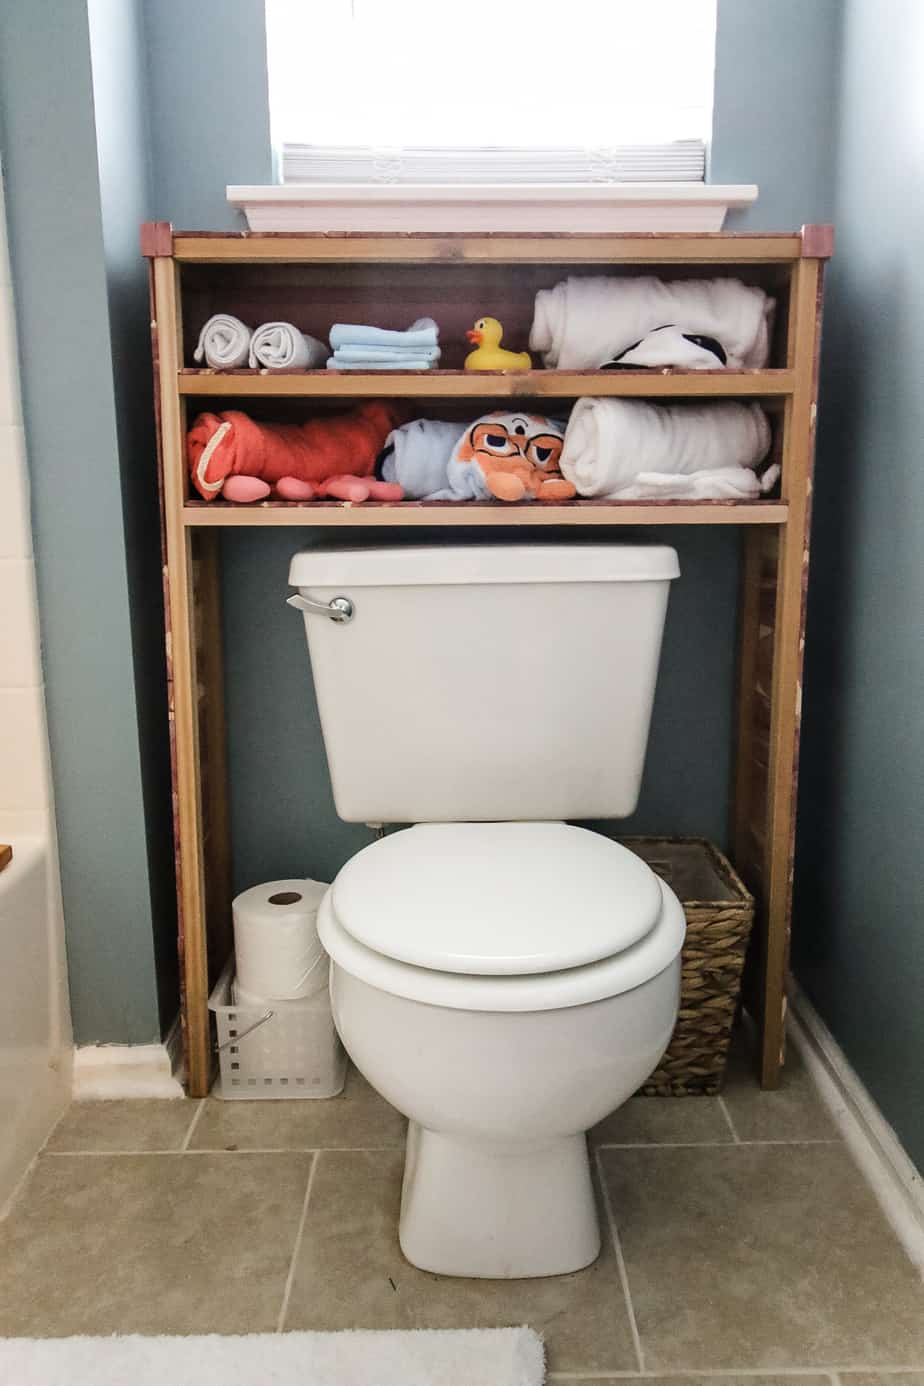 How to build DIY Over the Toilet Storage shelves